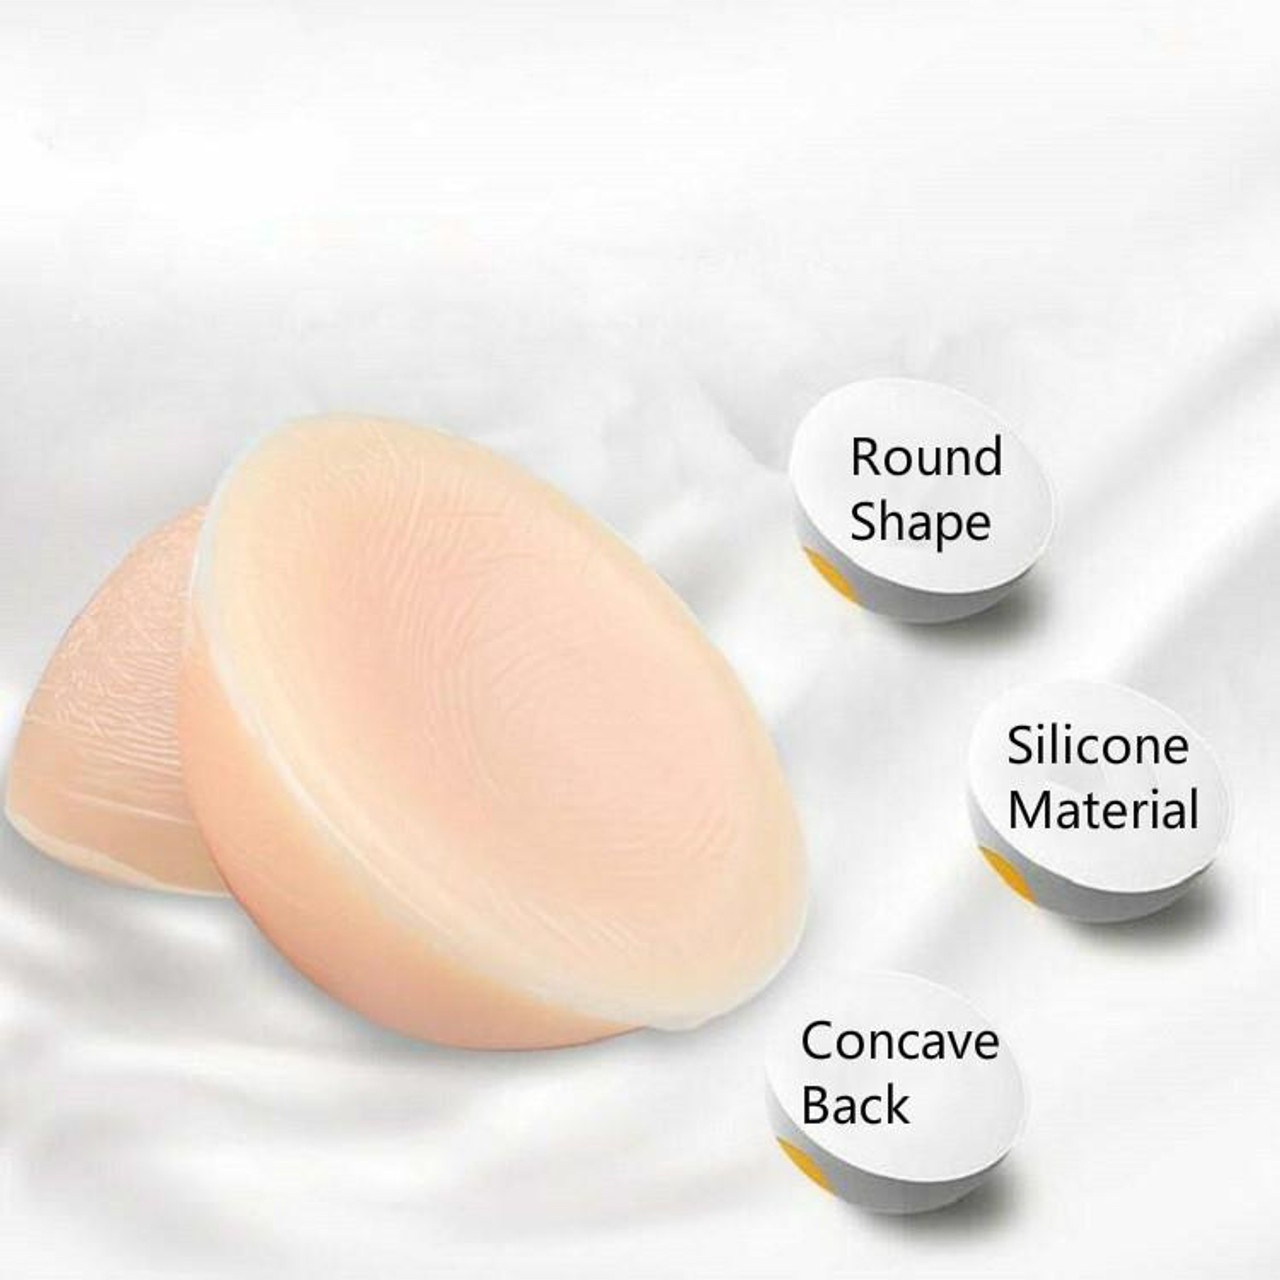 Skinless Silicone Breast Implants Bionic Breast Implants Fake Breast  Underwear Chest Pads, Size:D Cup(Paste Skin Tone), snatcher